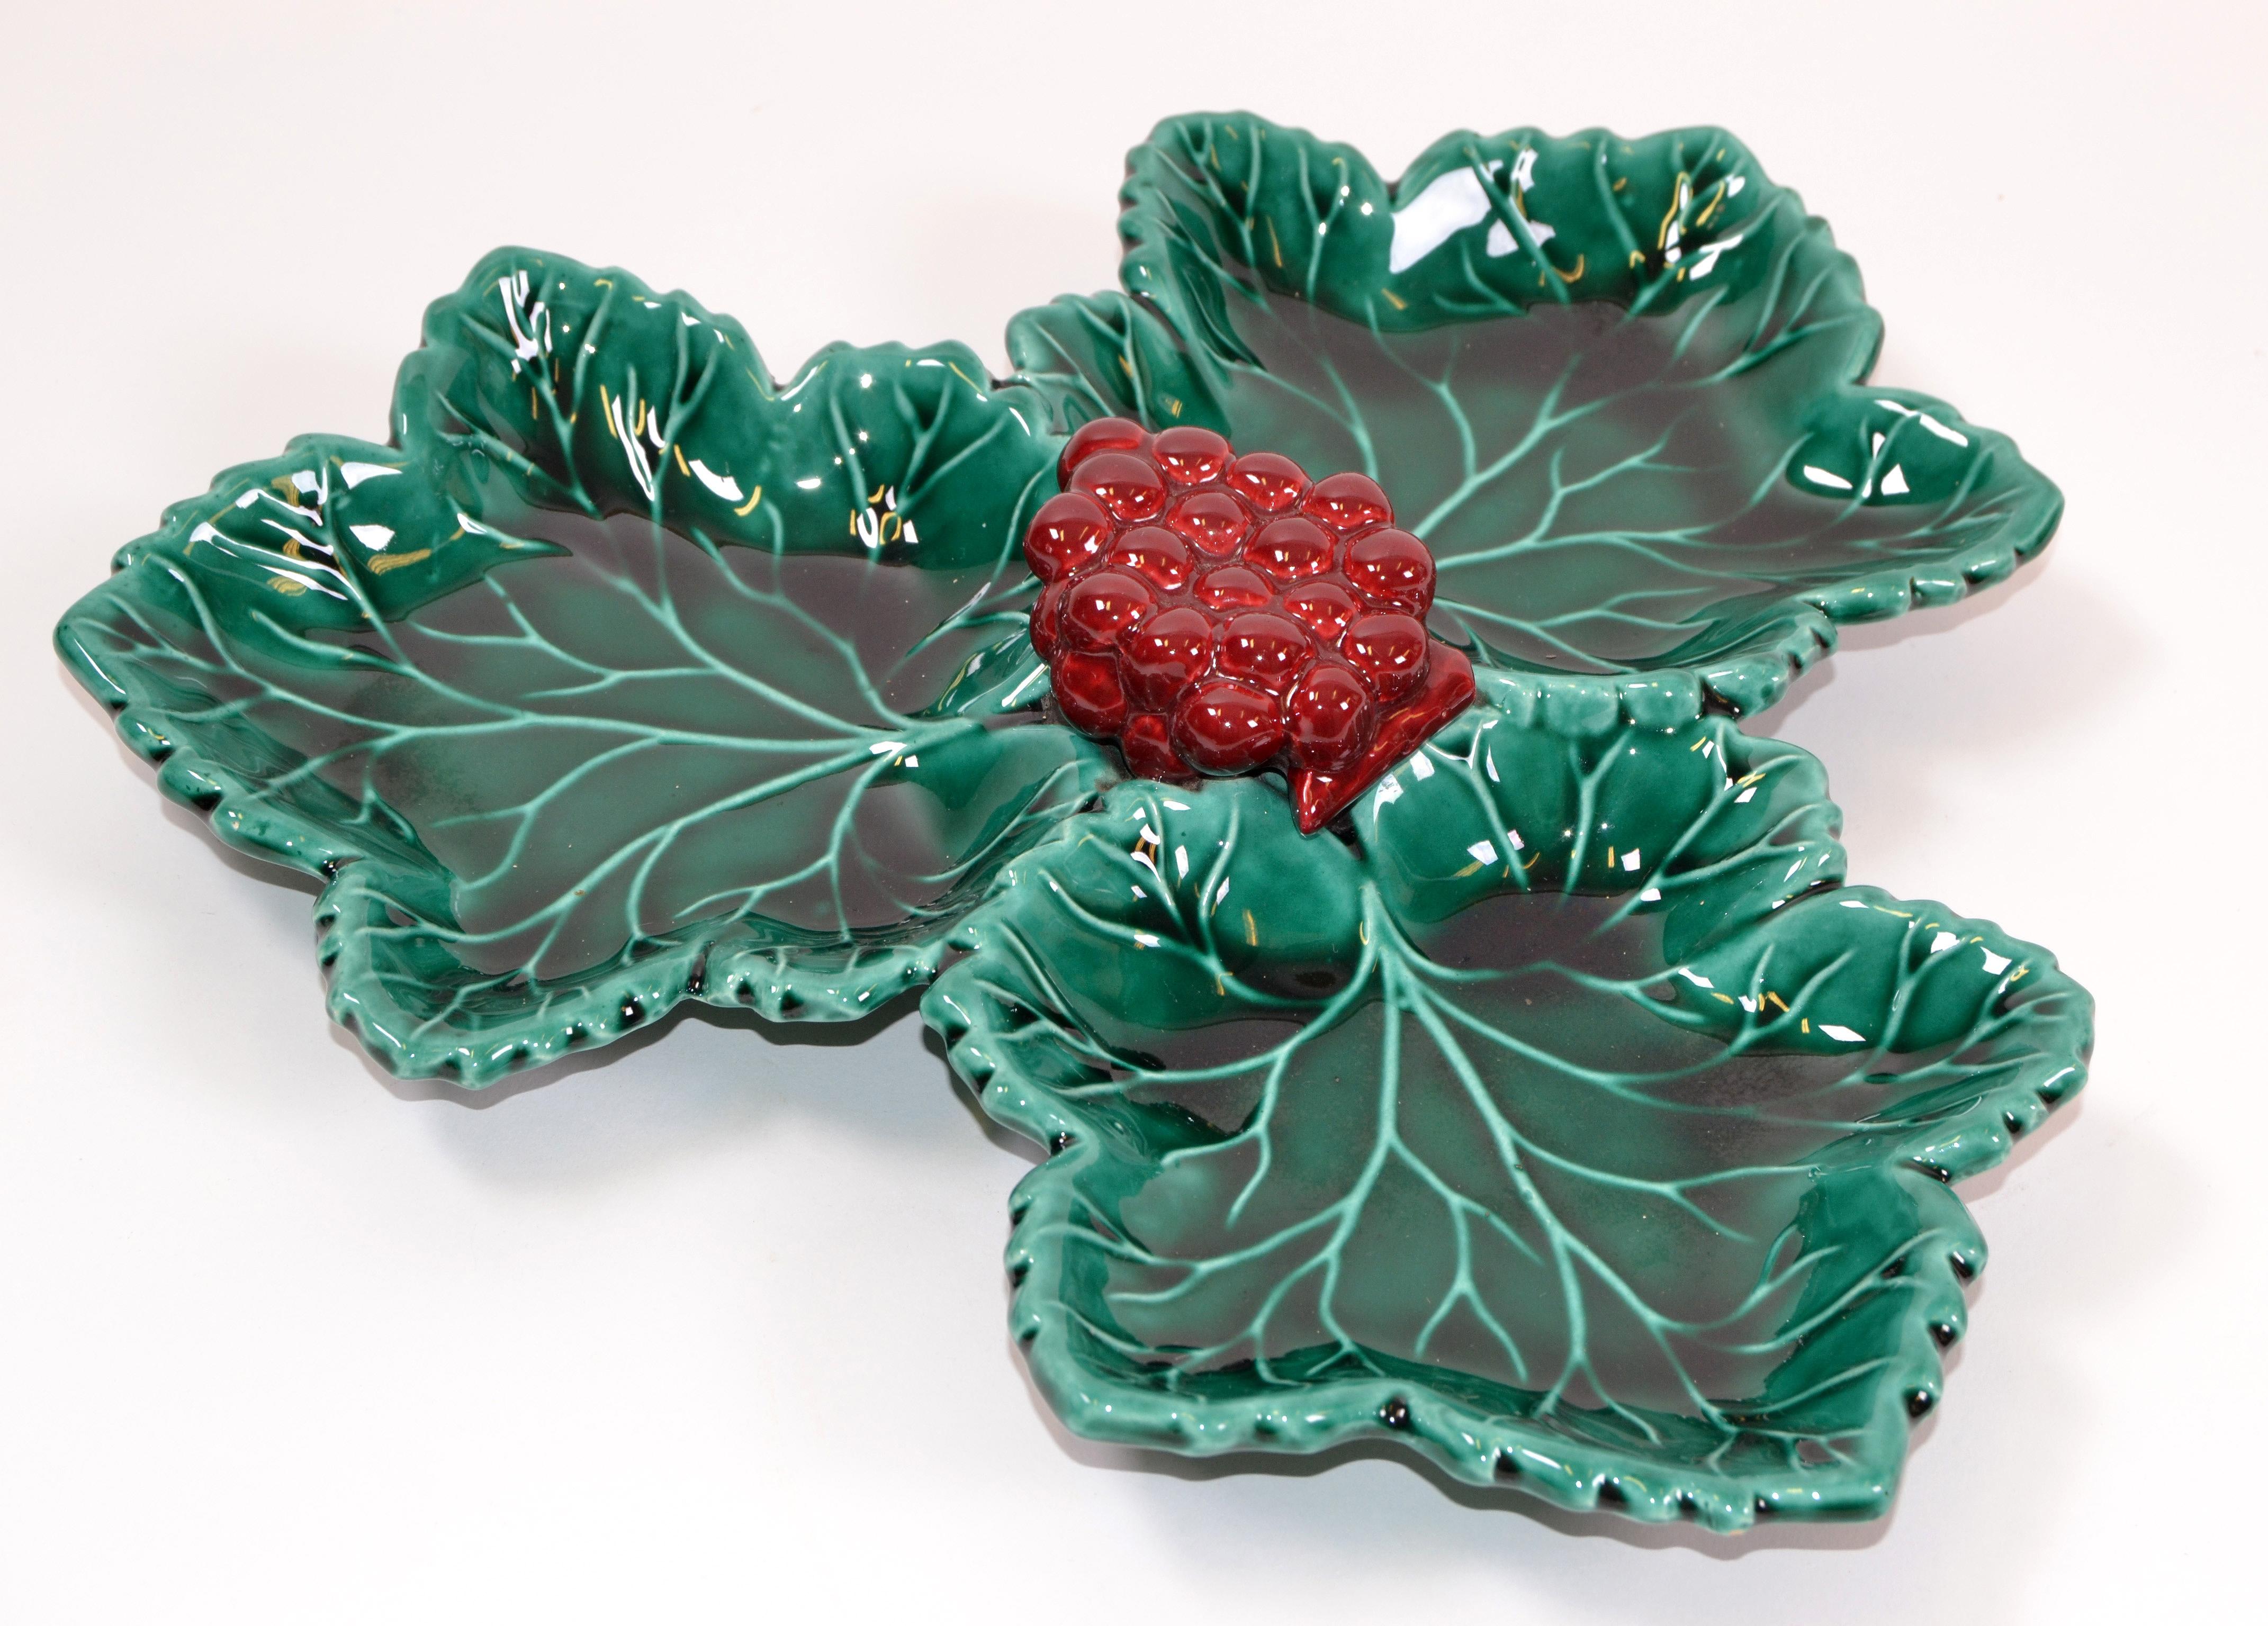 Vallauris French Glazed Grapes & Vine Leaves Ceramic Serving Plate Green and Red For Sale 2